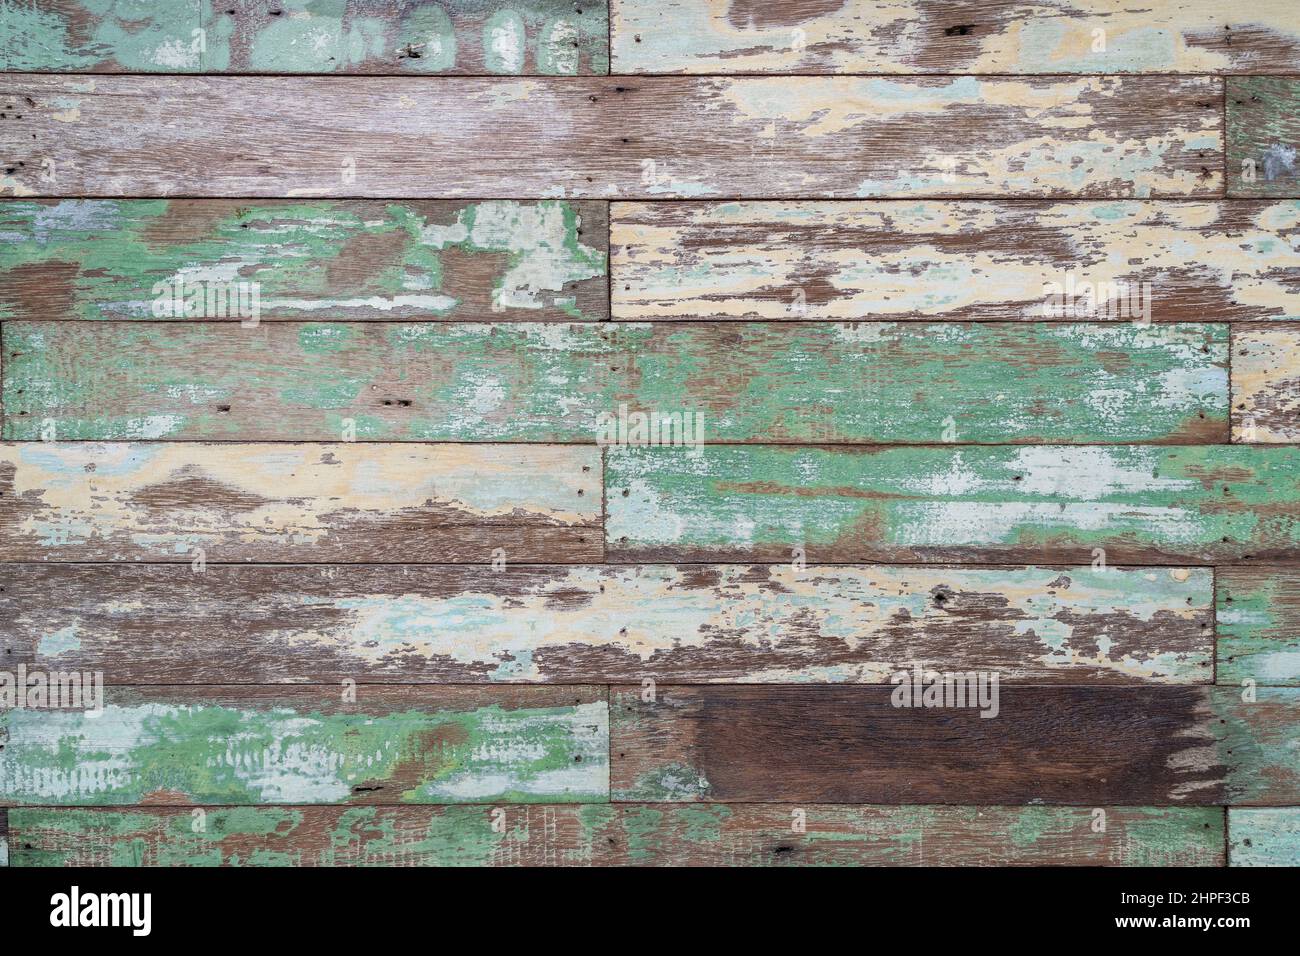 Distress painted panel wood background Stock Photo